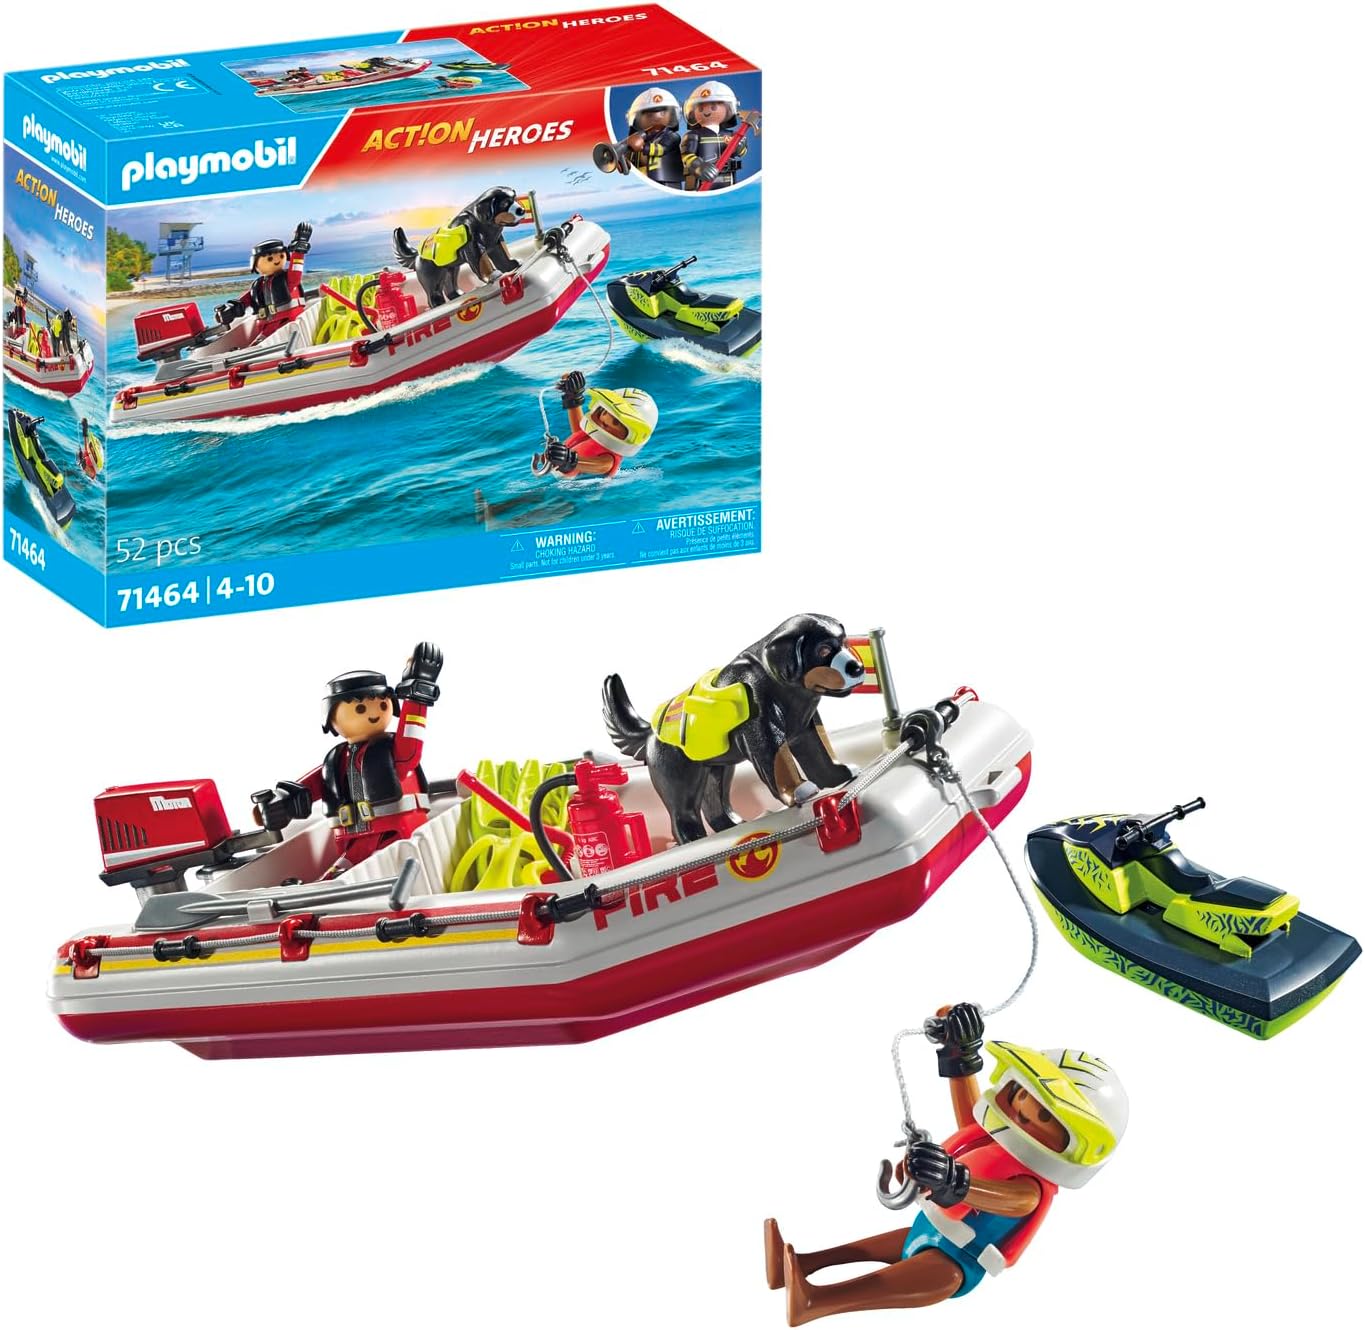 PLAYMOBIL Aktion 71464 Fire Boat with Aqua Scooter from 4 Years